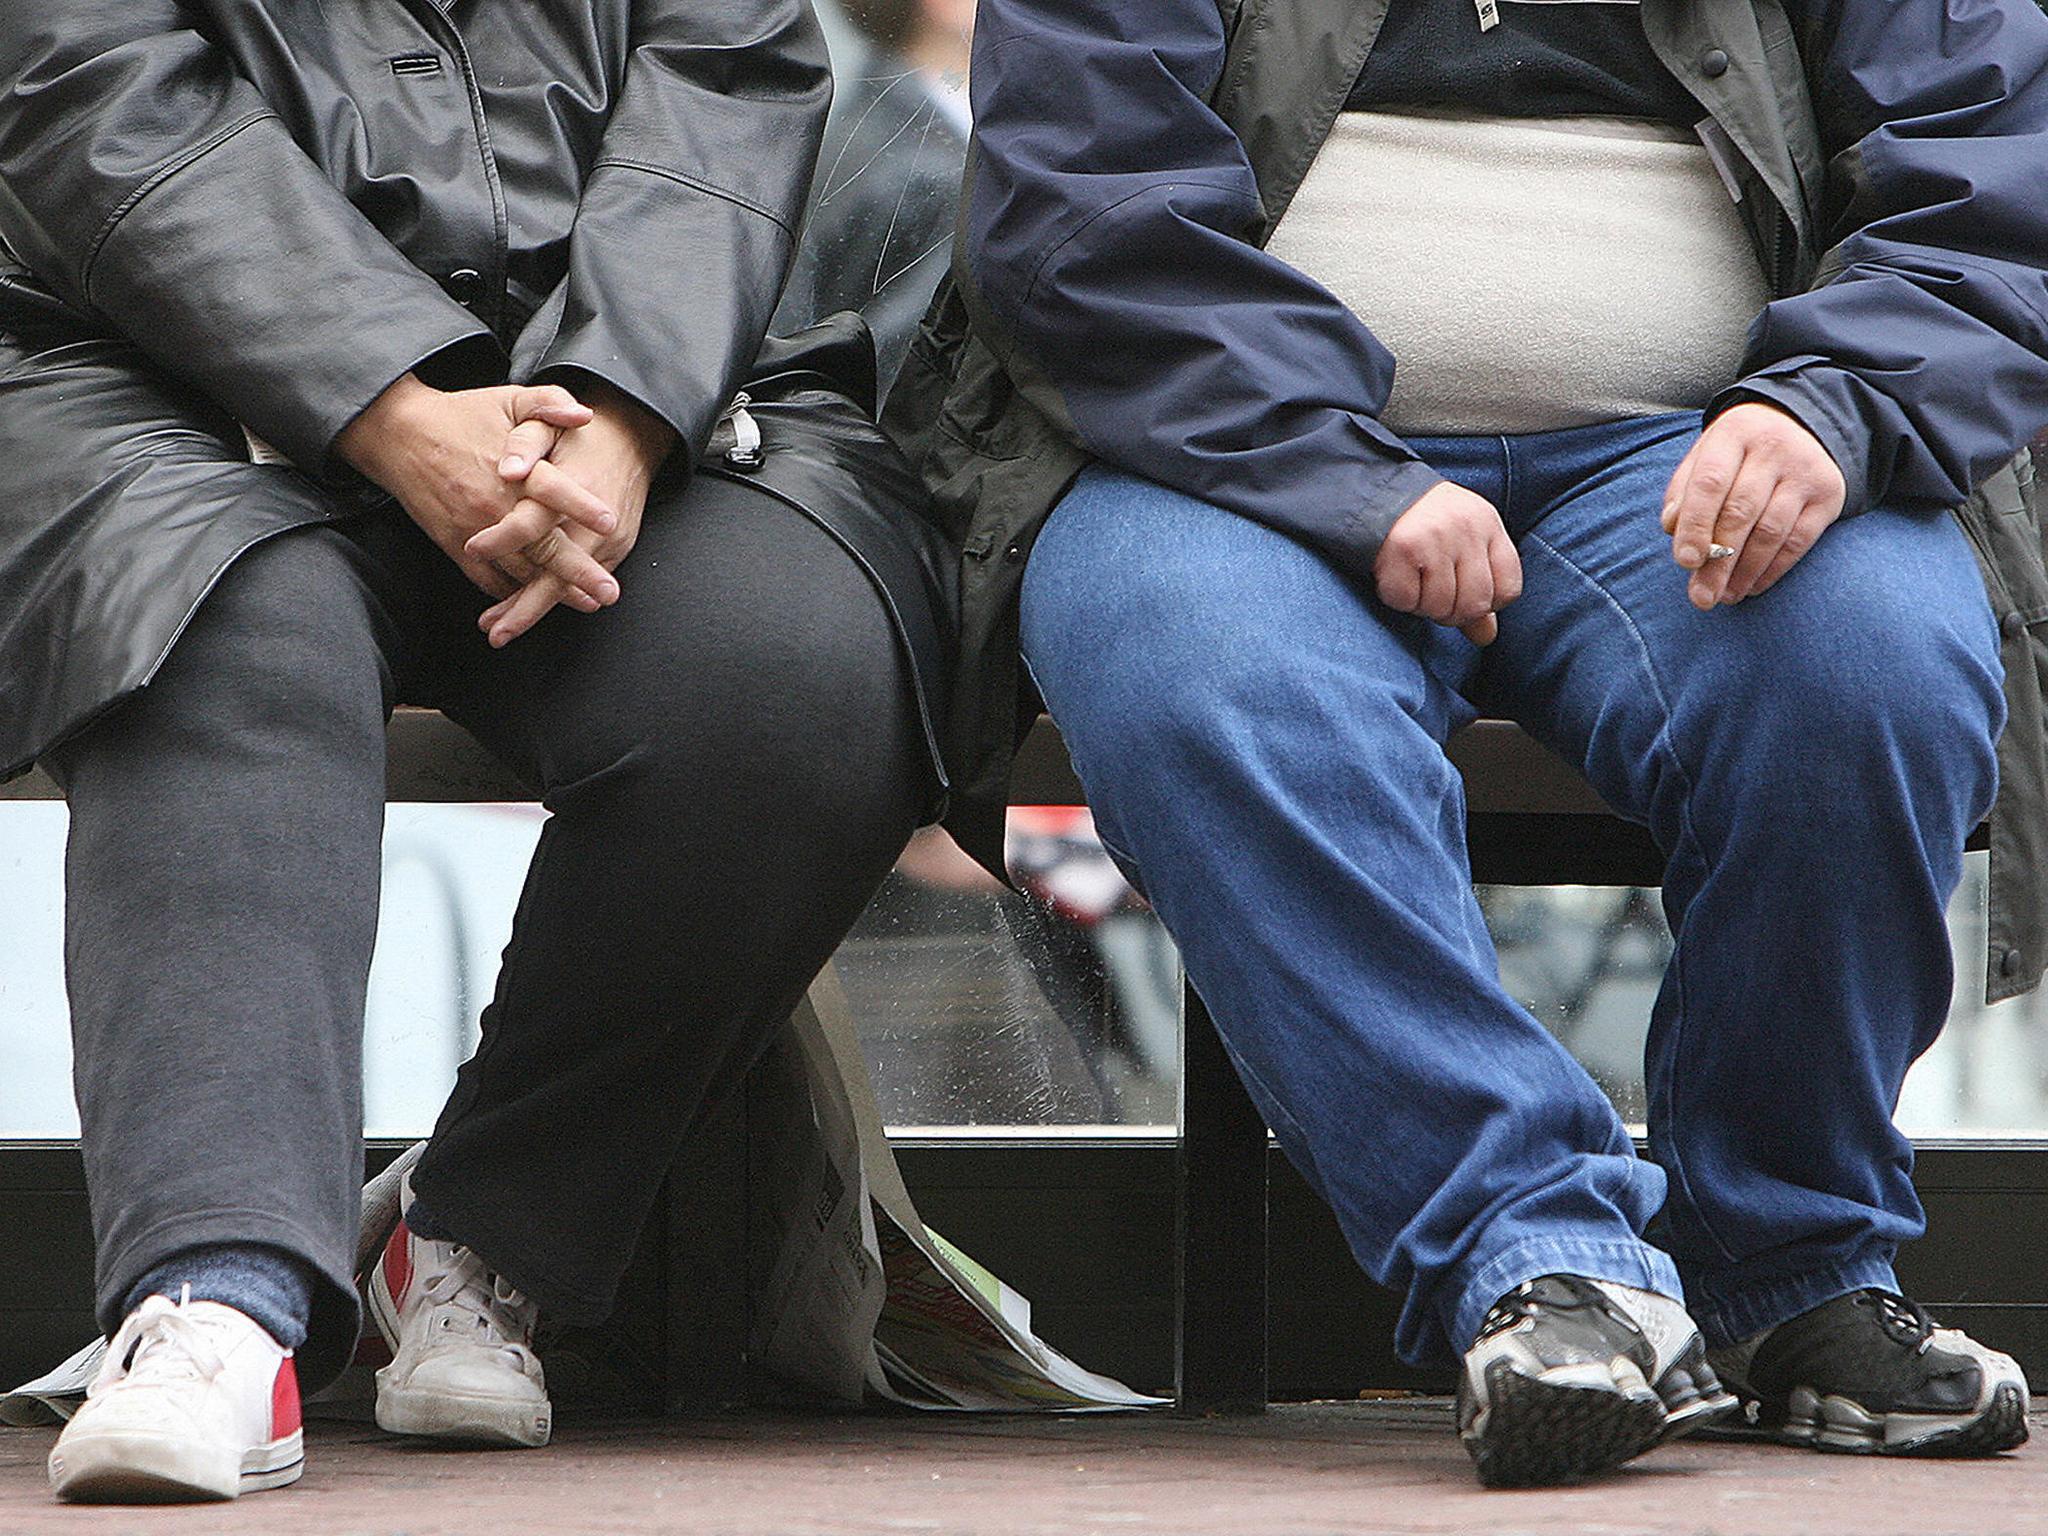 Britain was ranked sixth-worst for obesity levels out of the OECD’s 35 member states